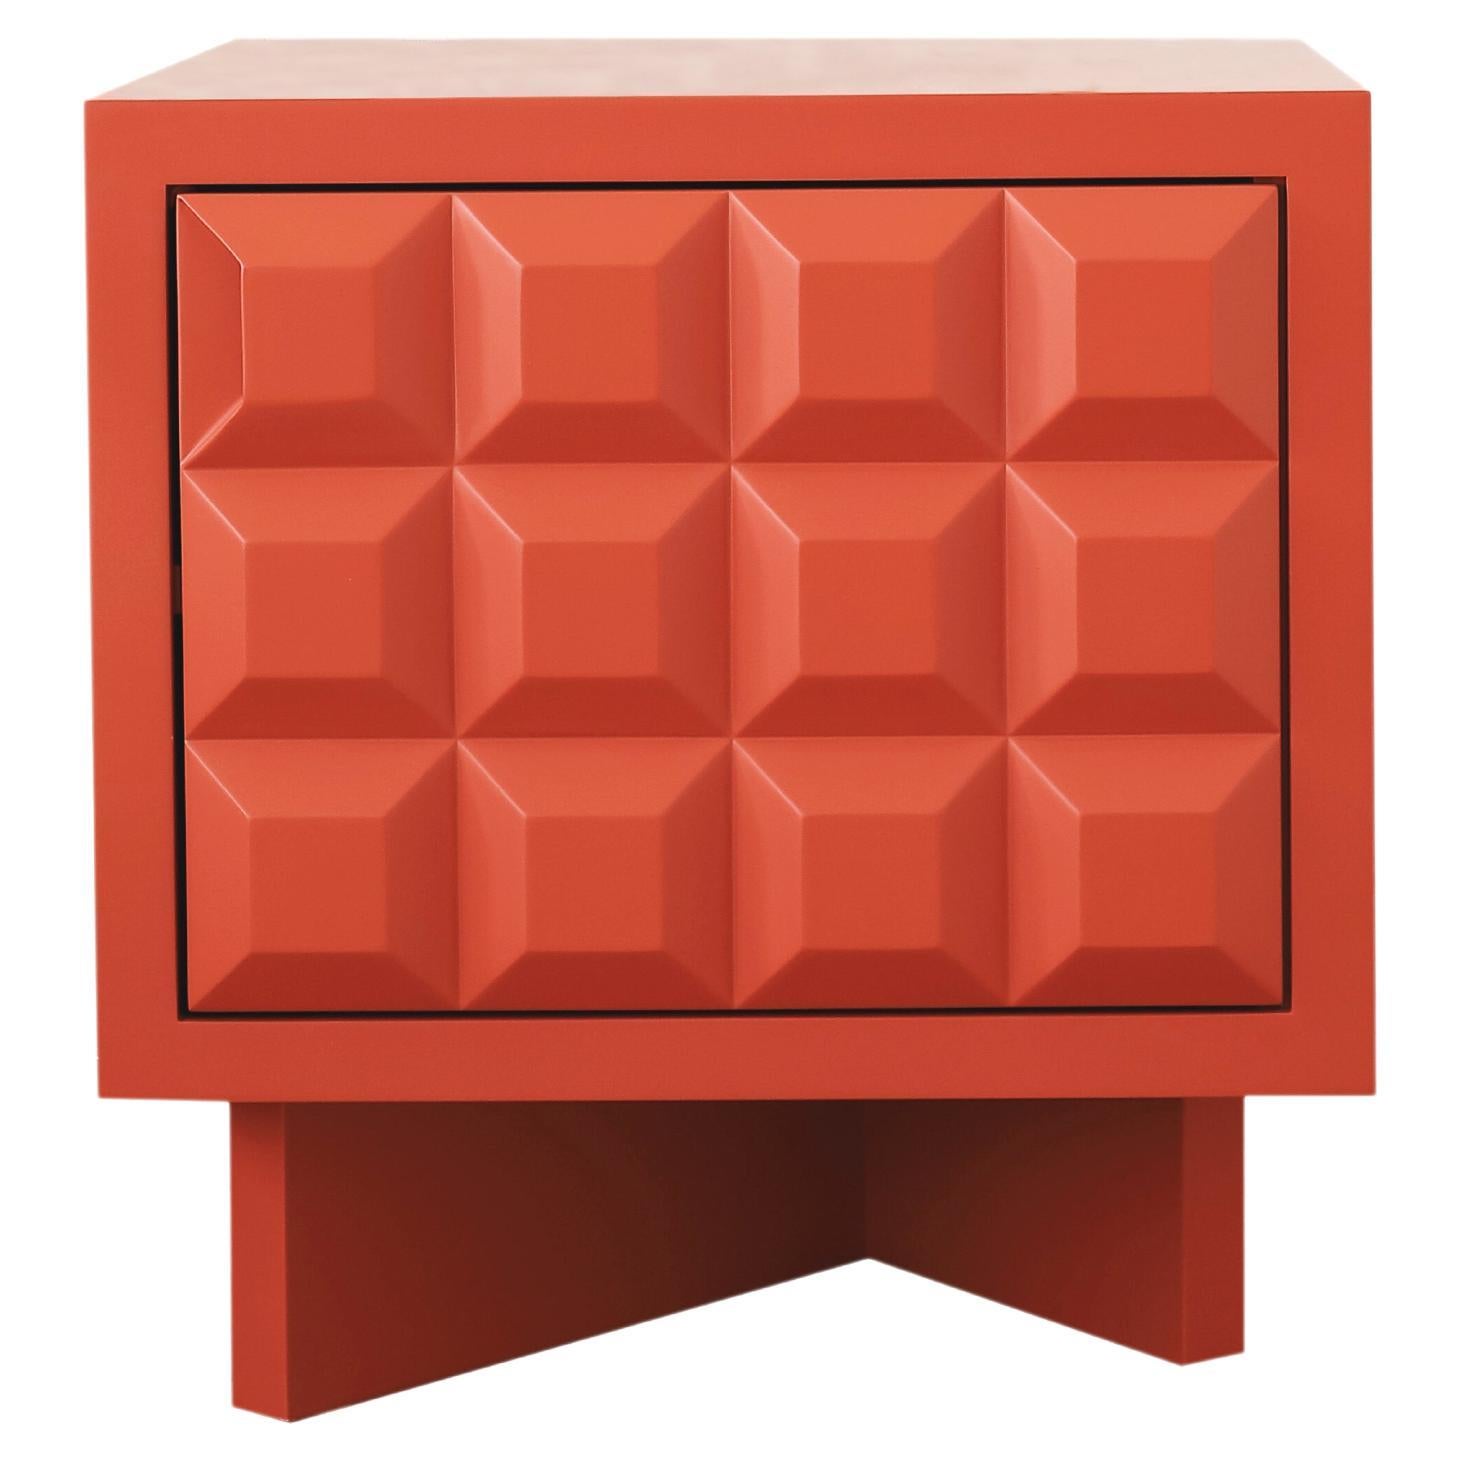  Karo Nightstand Inspired by Brutalism with Outstanding Look - Coral Colour